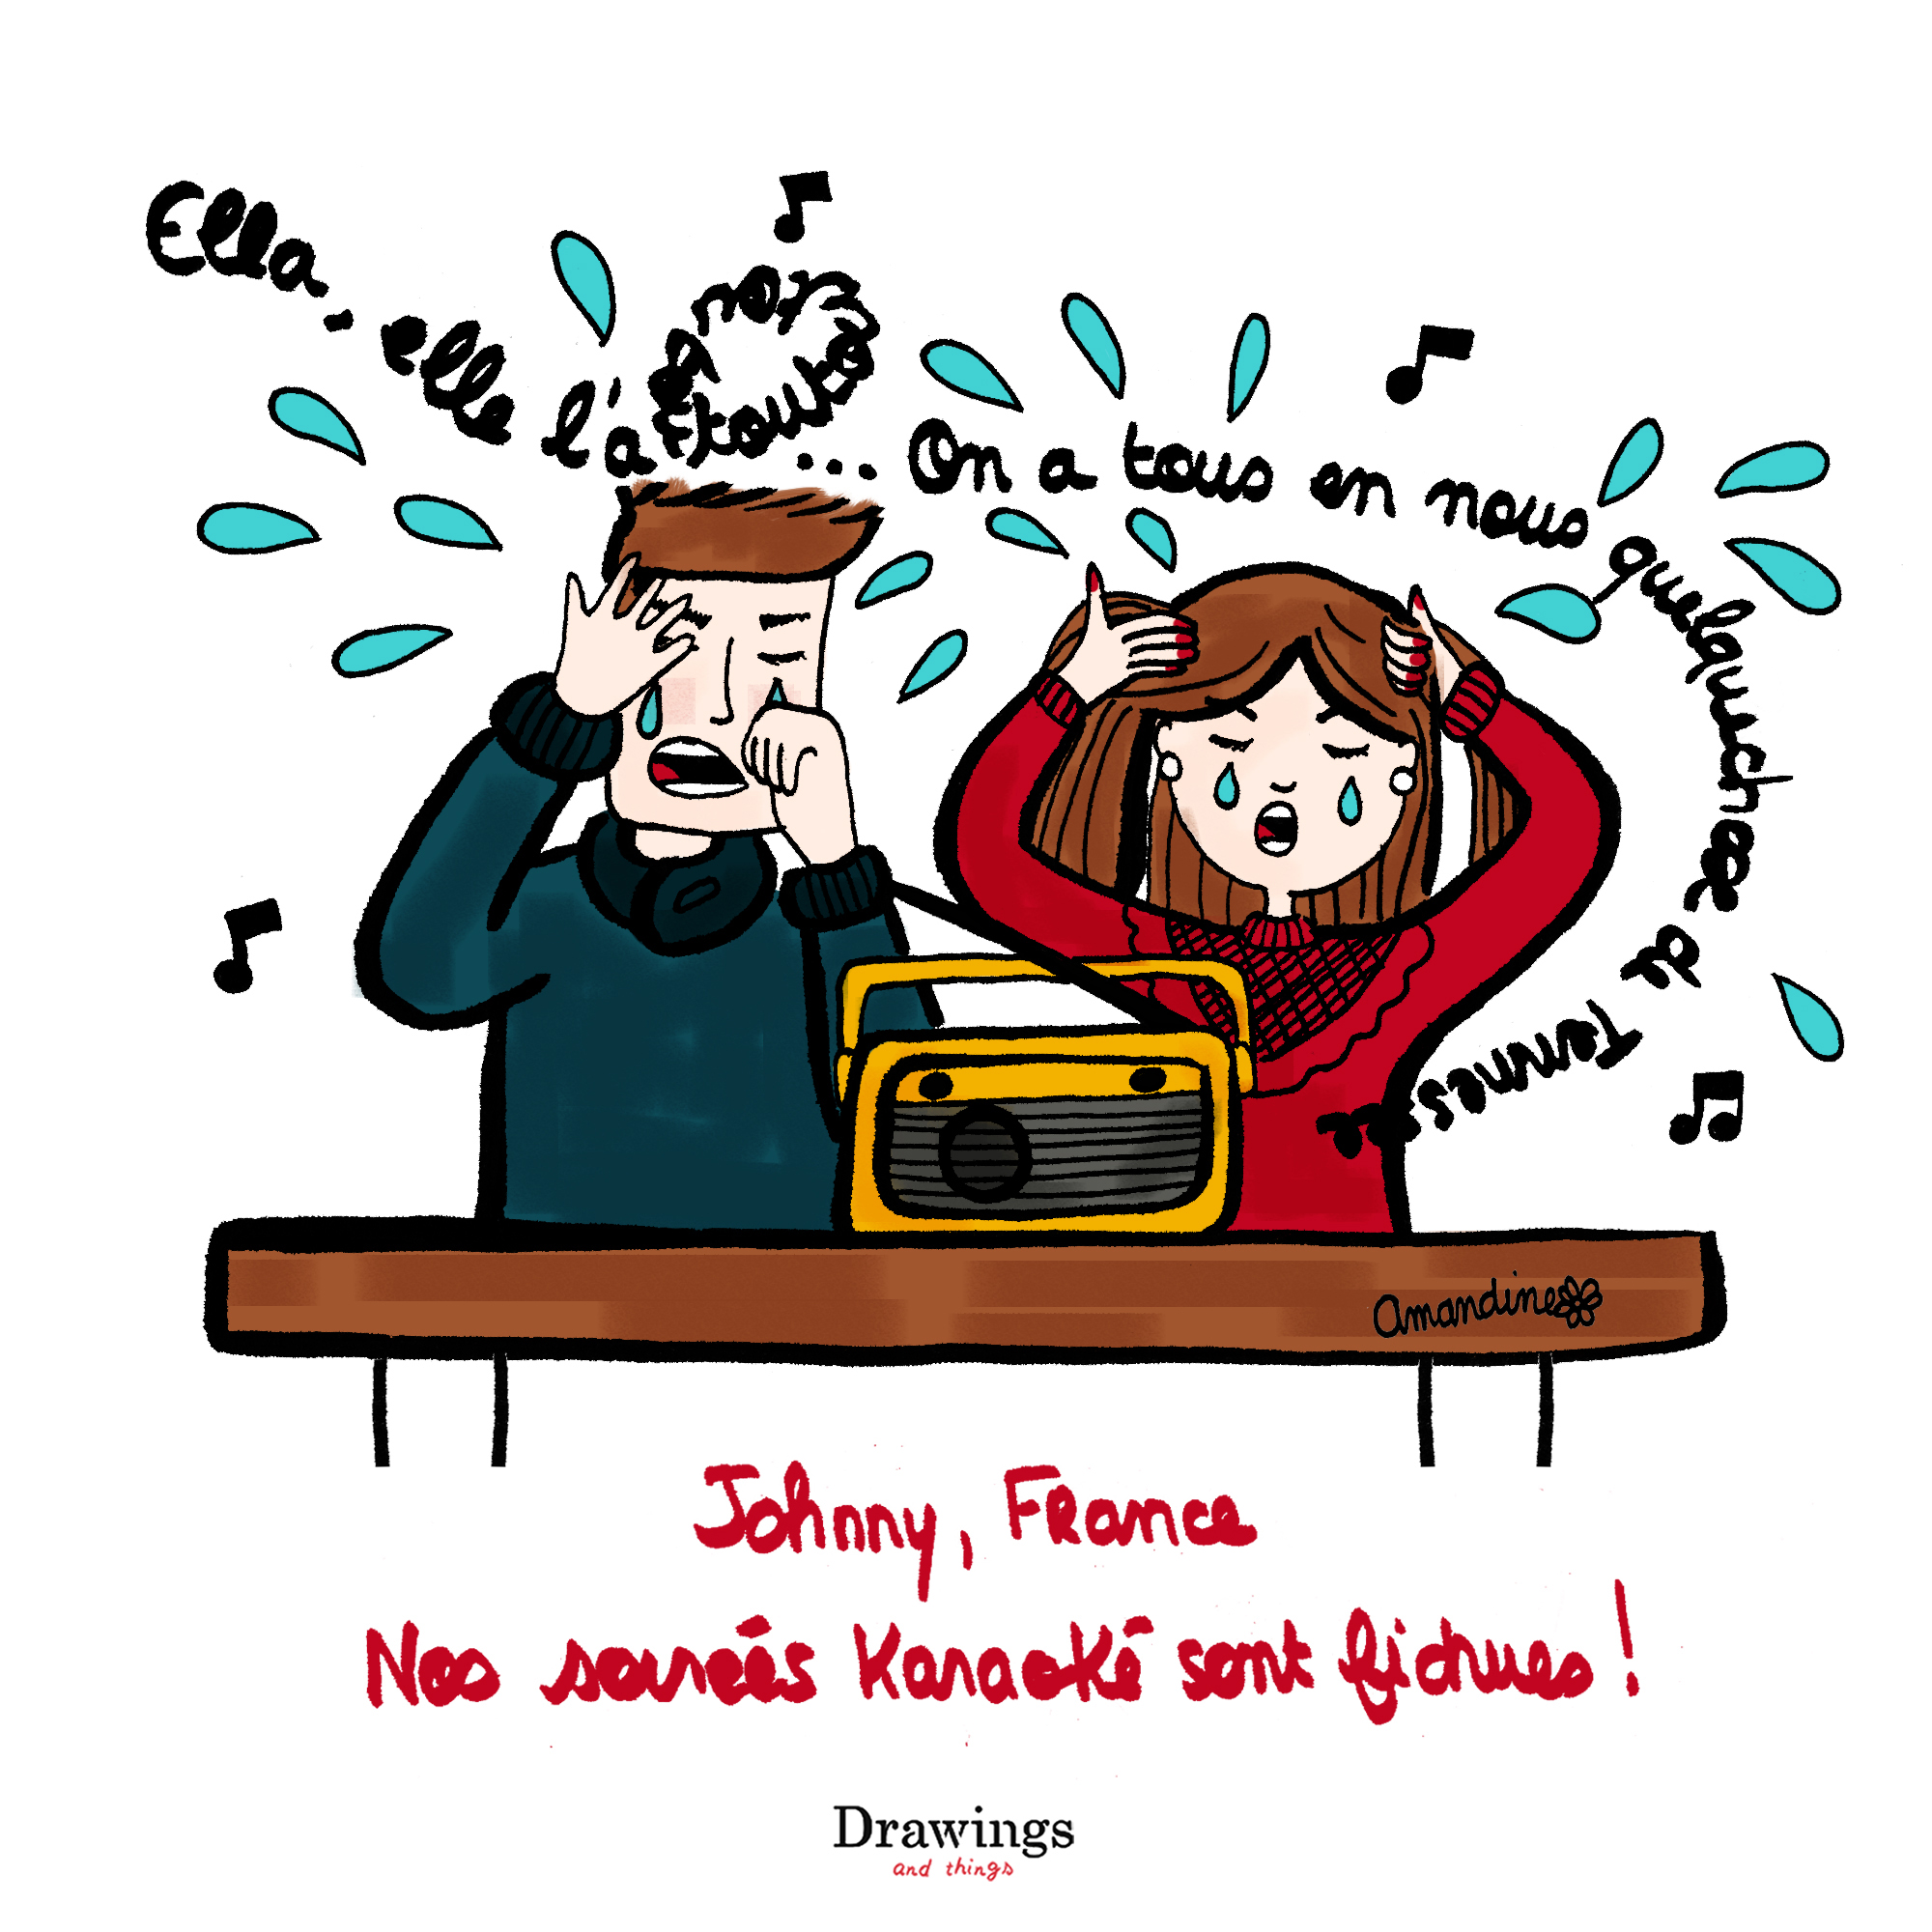 Johnny Hallyday et France Gall - Illustration by Drawingsandthings